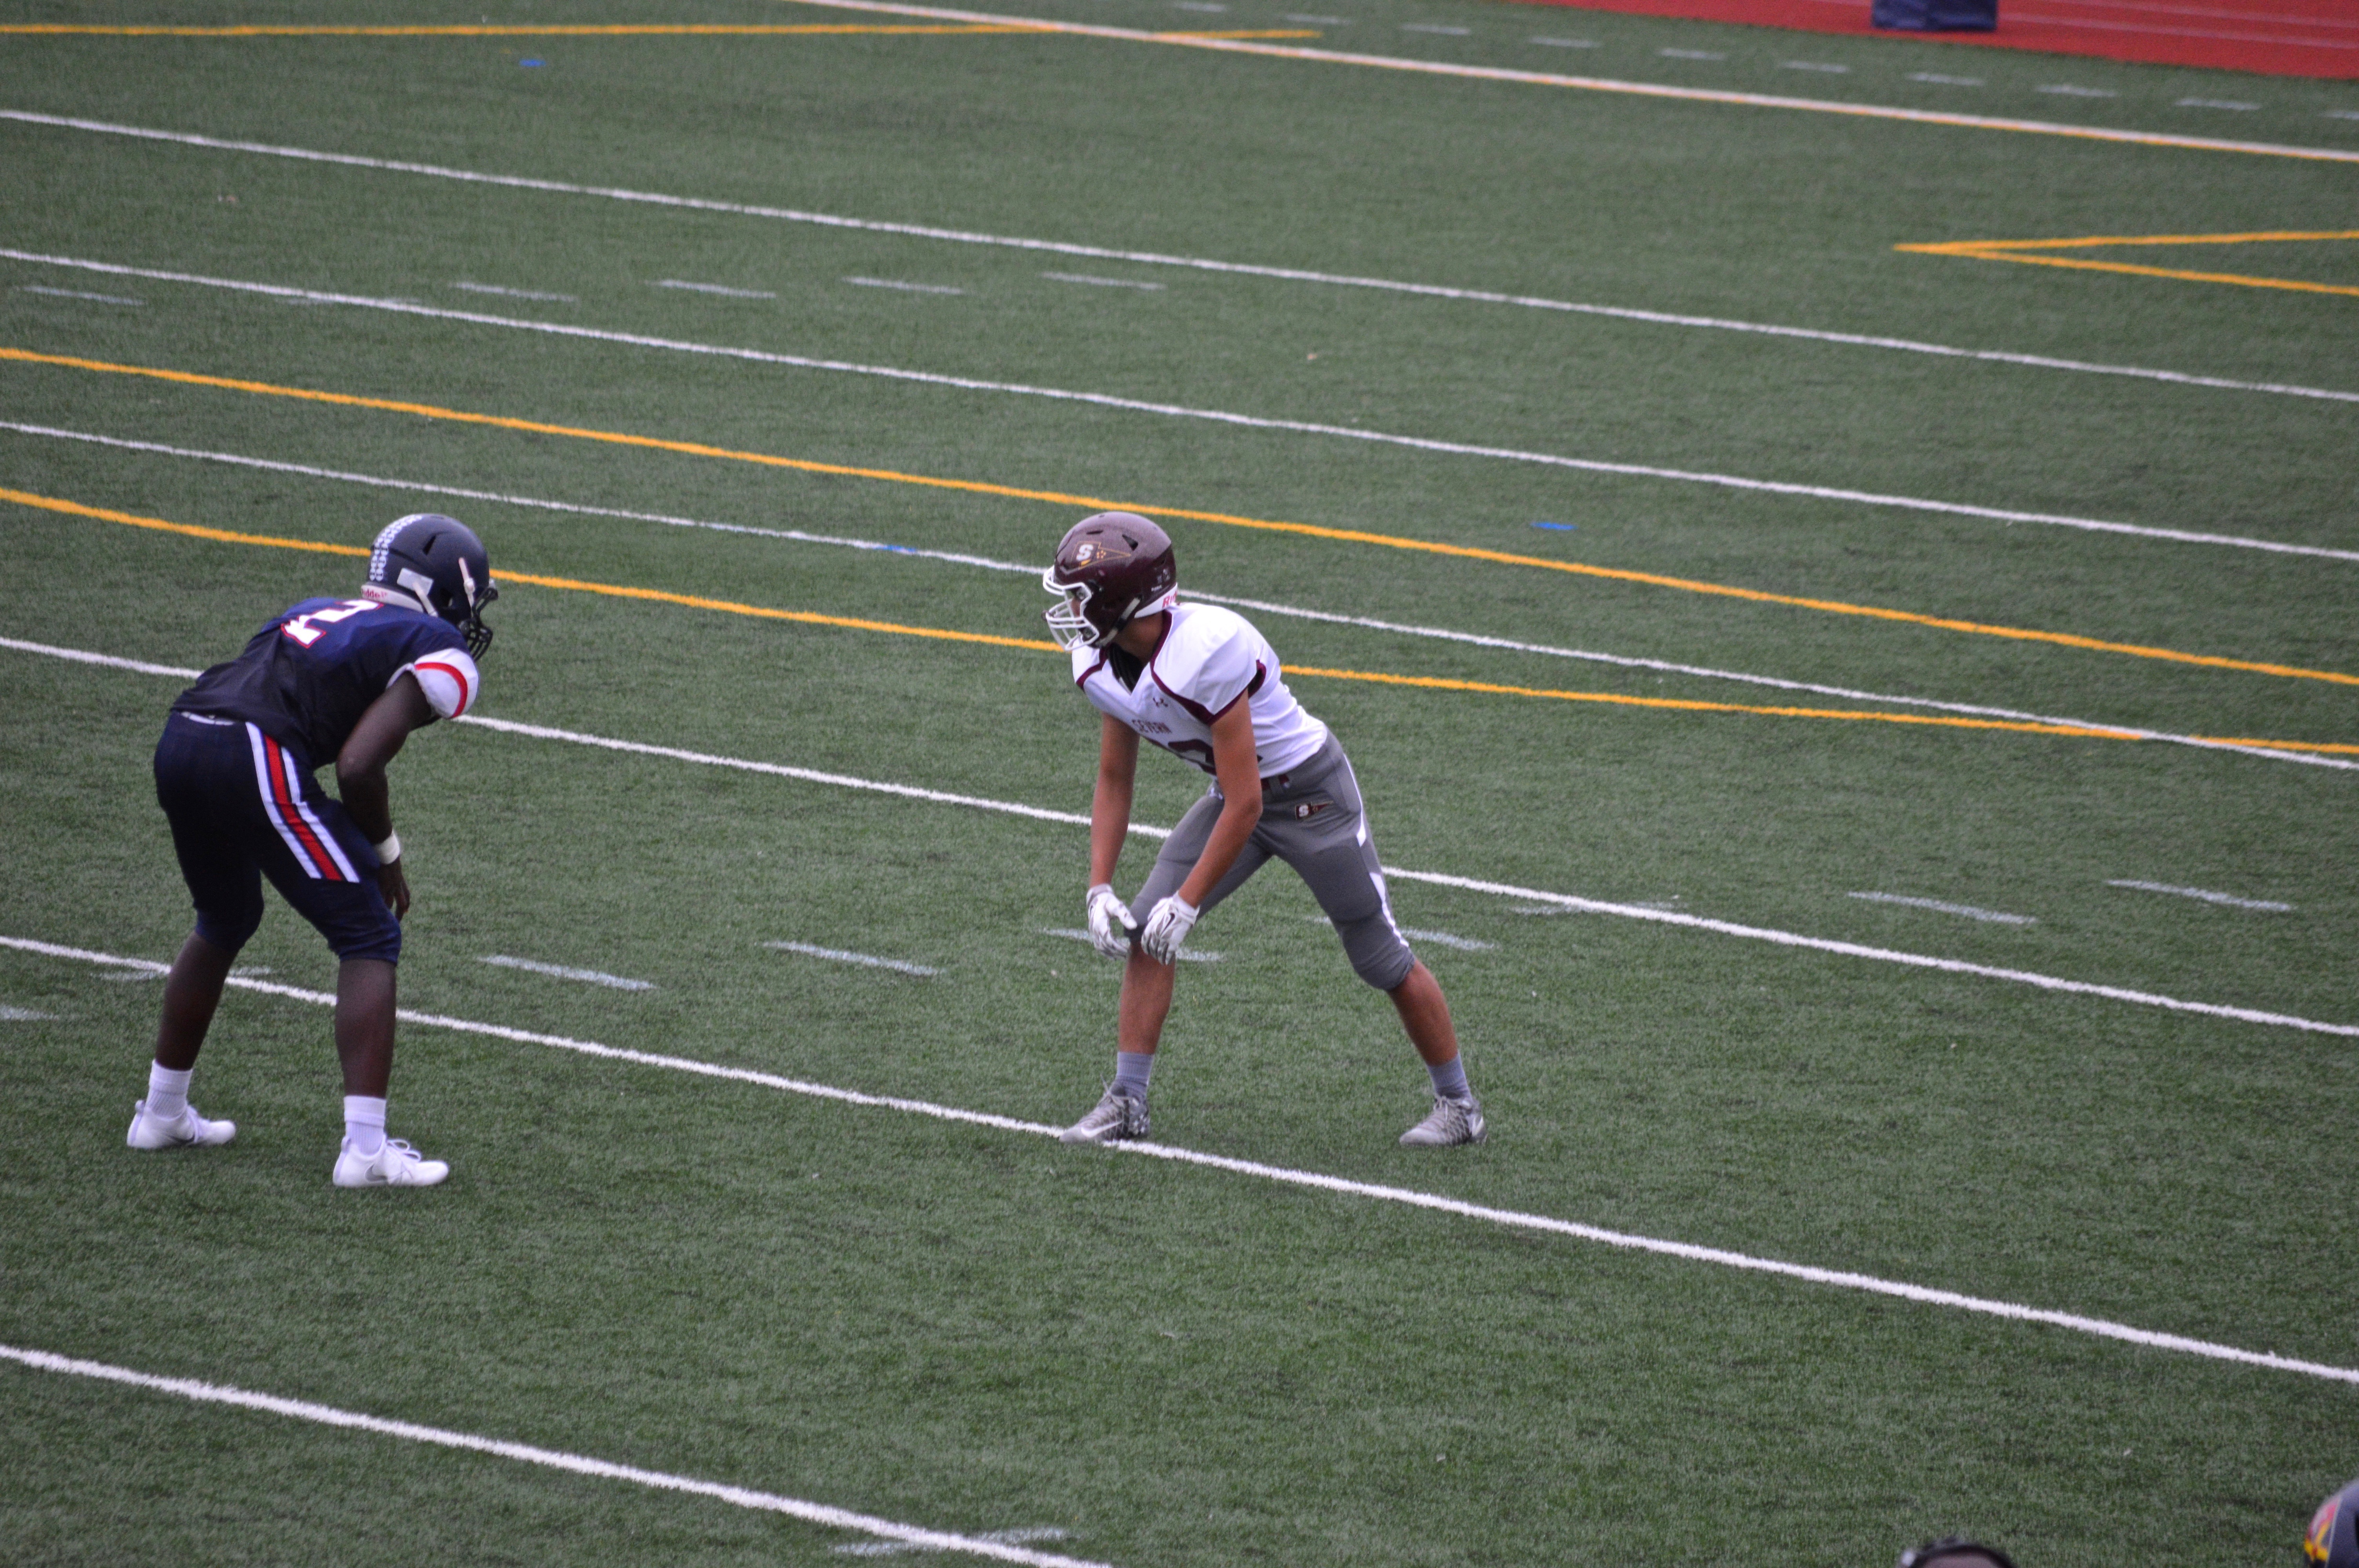 Playing Wide Receiver for Severn